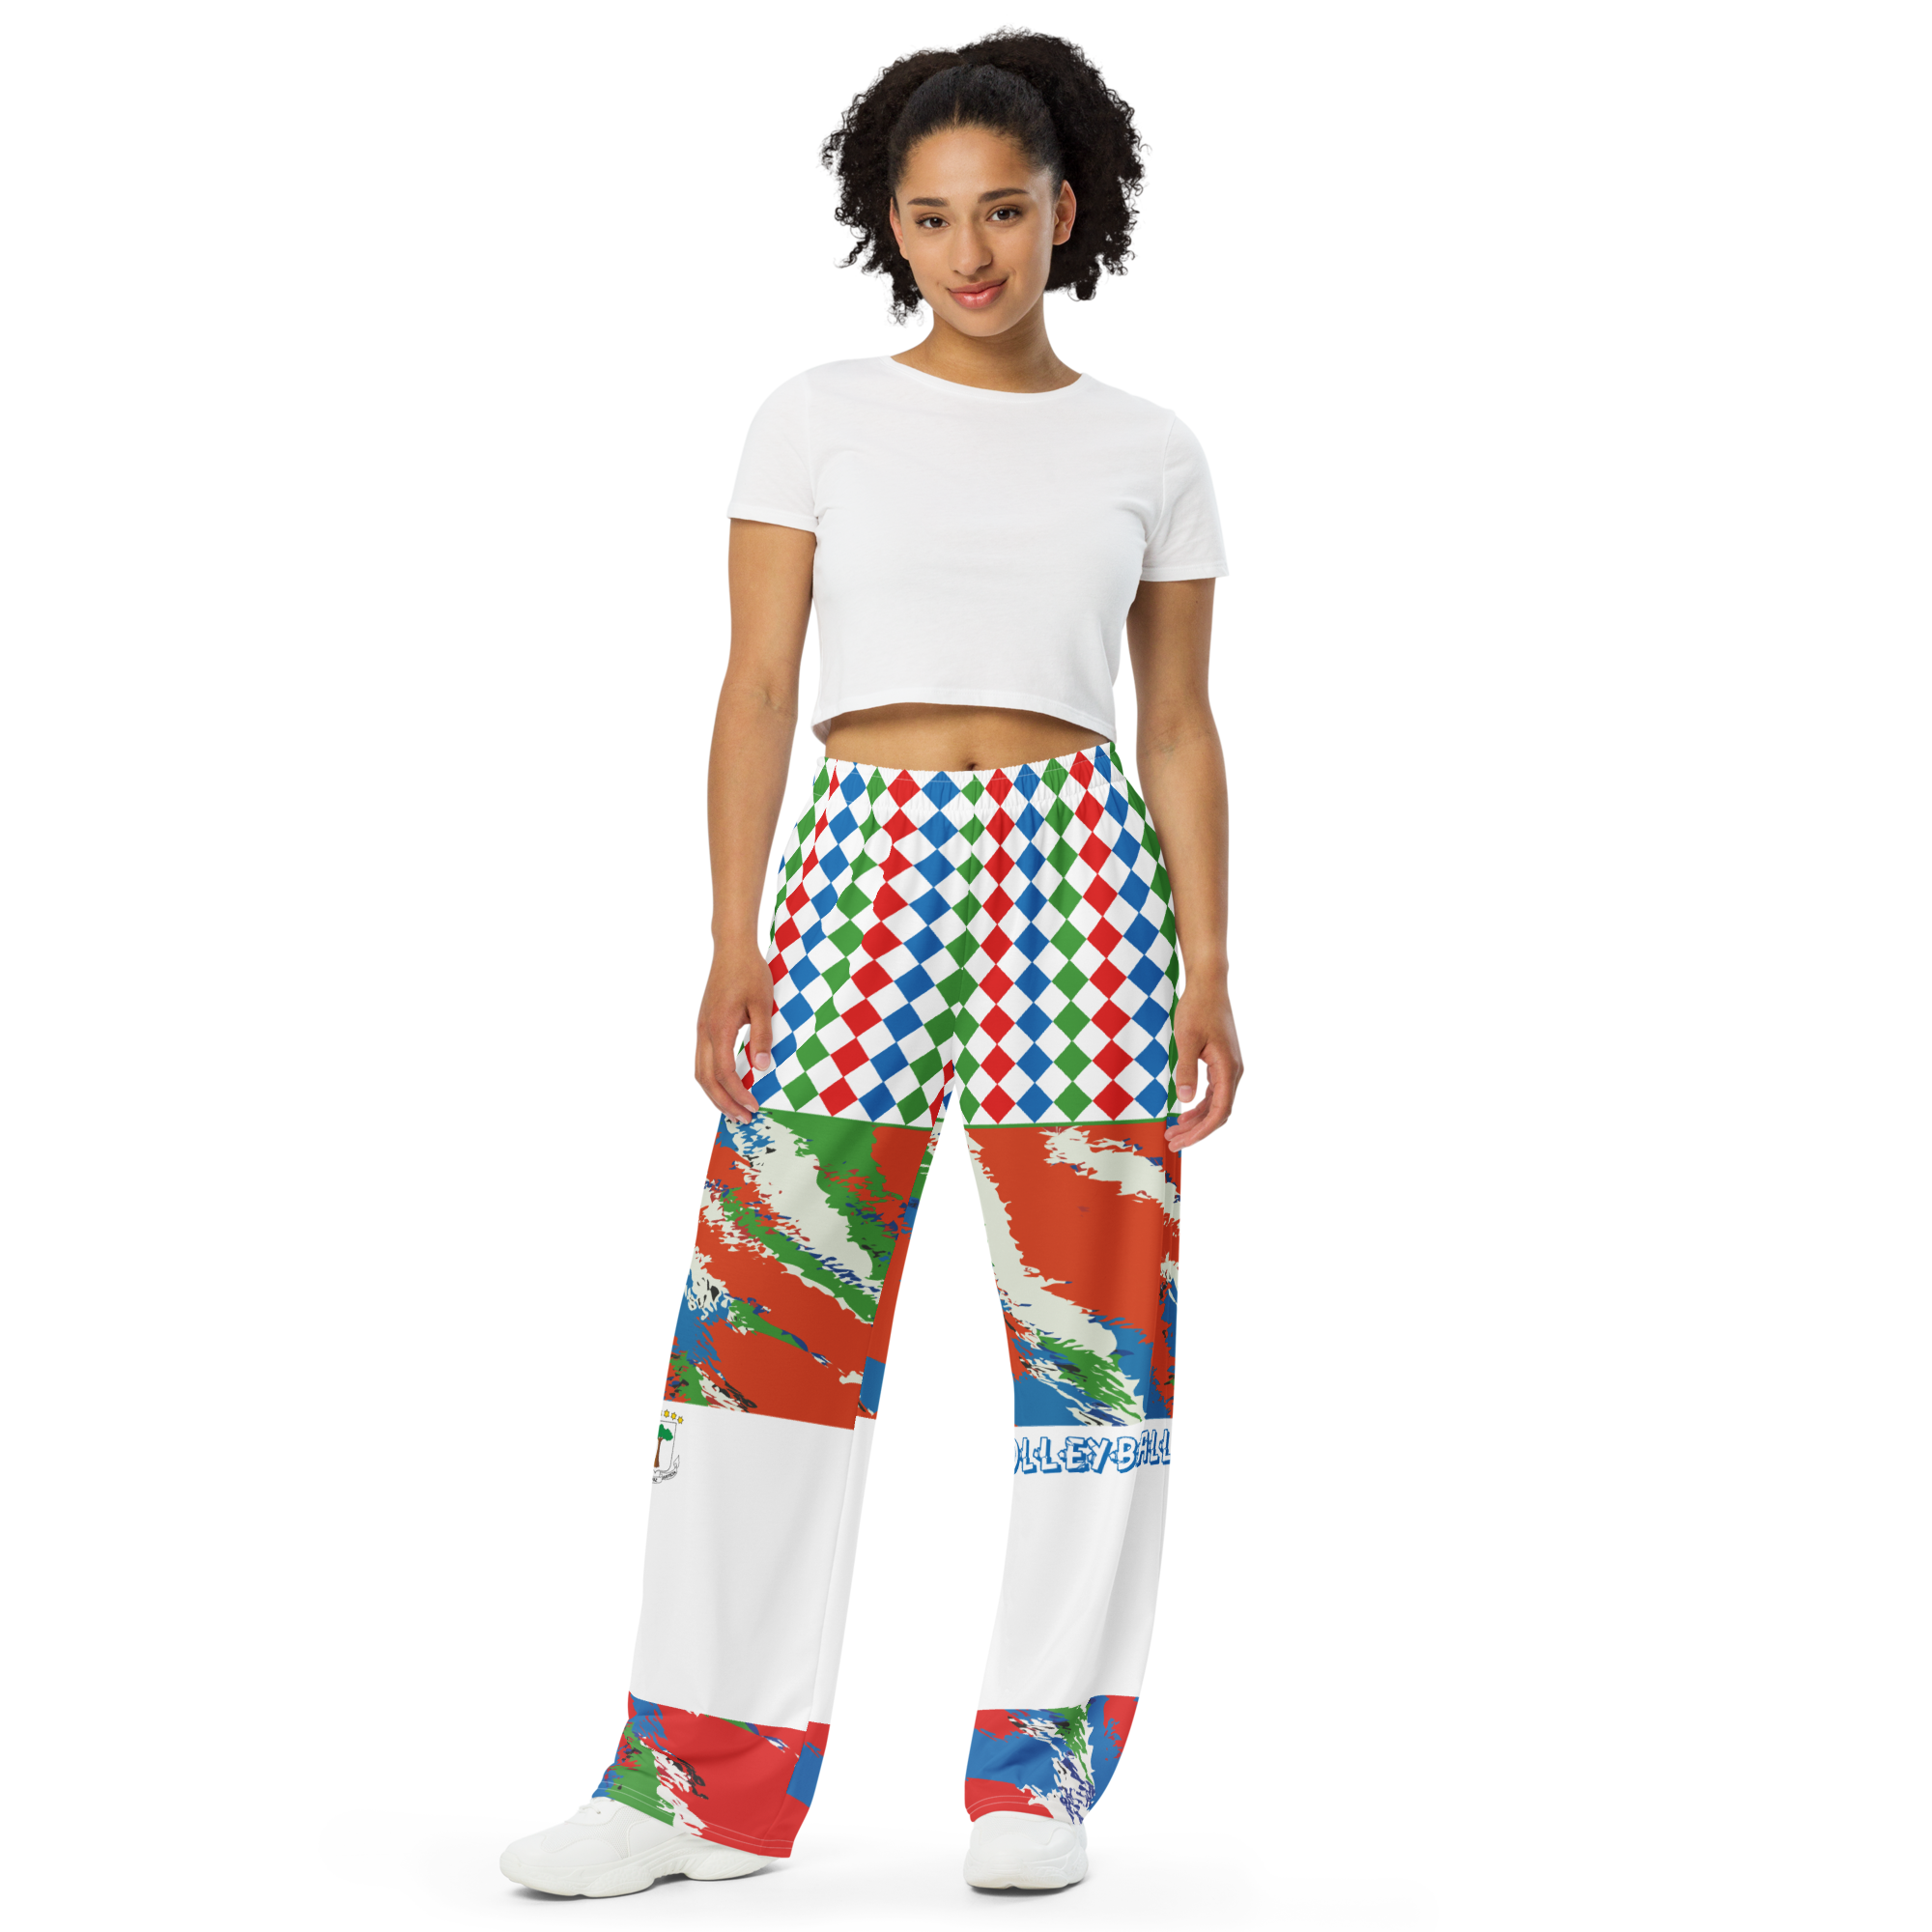 My wide leg pajama pants are more flattering, way more colorful and super comfy pj pants with deep pockets, a long drawstring and they run true to size.